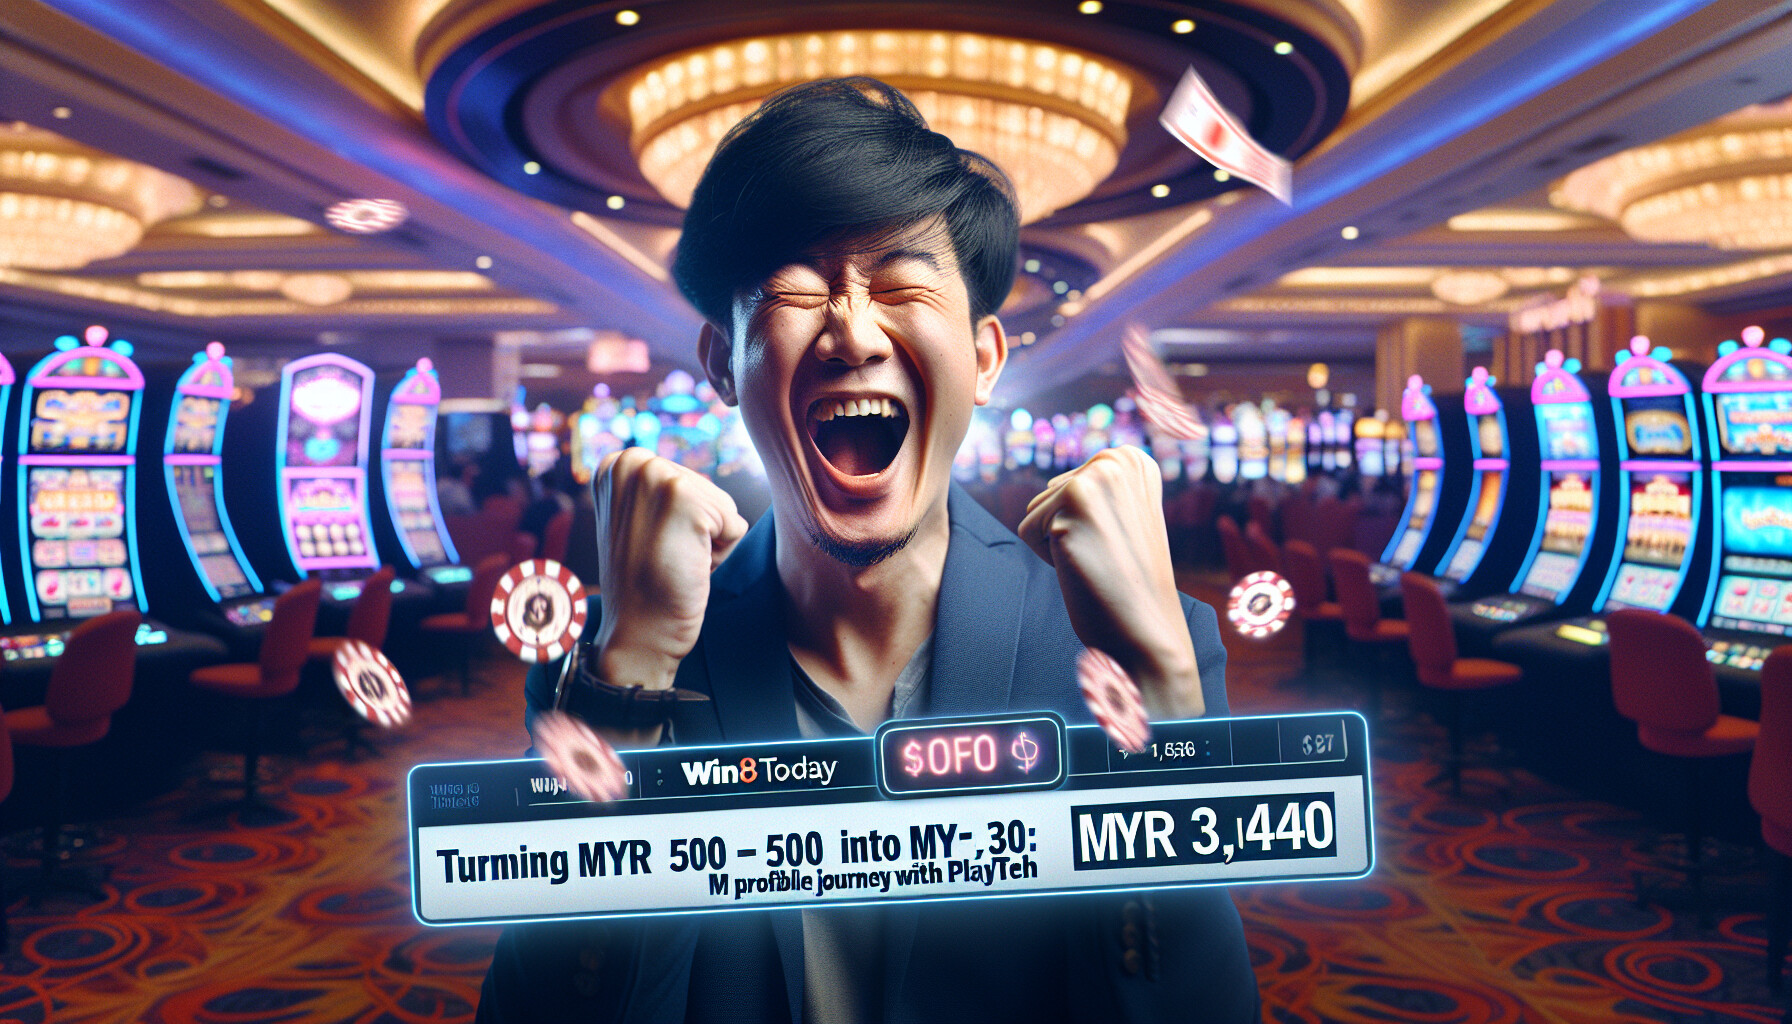  🎰🚀 Watch MYR 500 turn into MYR 3,040💰! Discover my jaw-dropping journey with Playtech here! 🚀🎲 